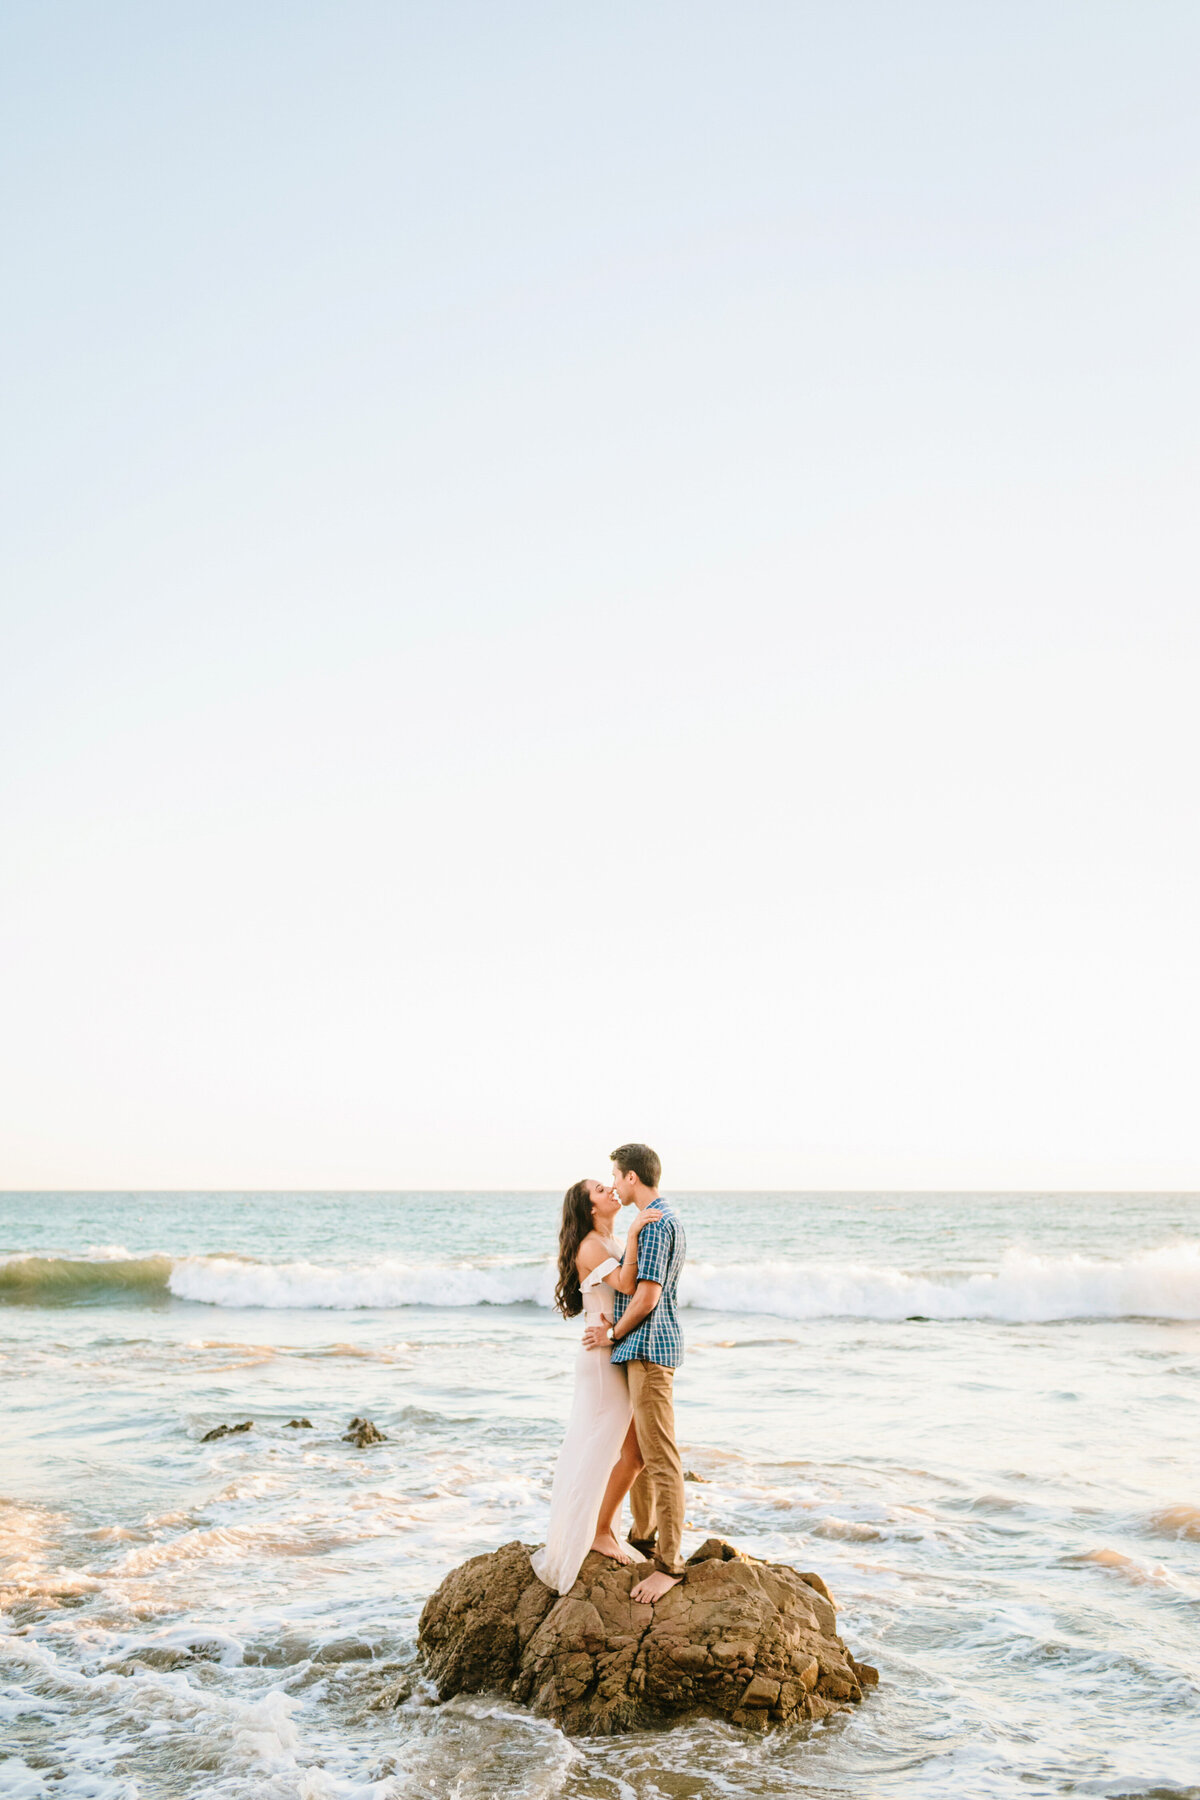 Best California and Texas Engagement Photographer-Jodee Debes Photography-166